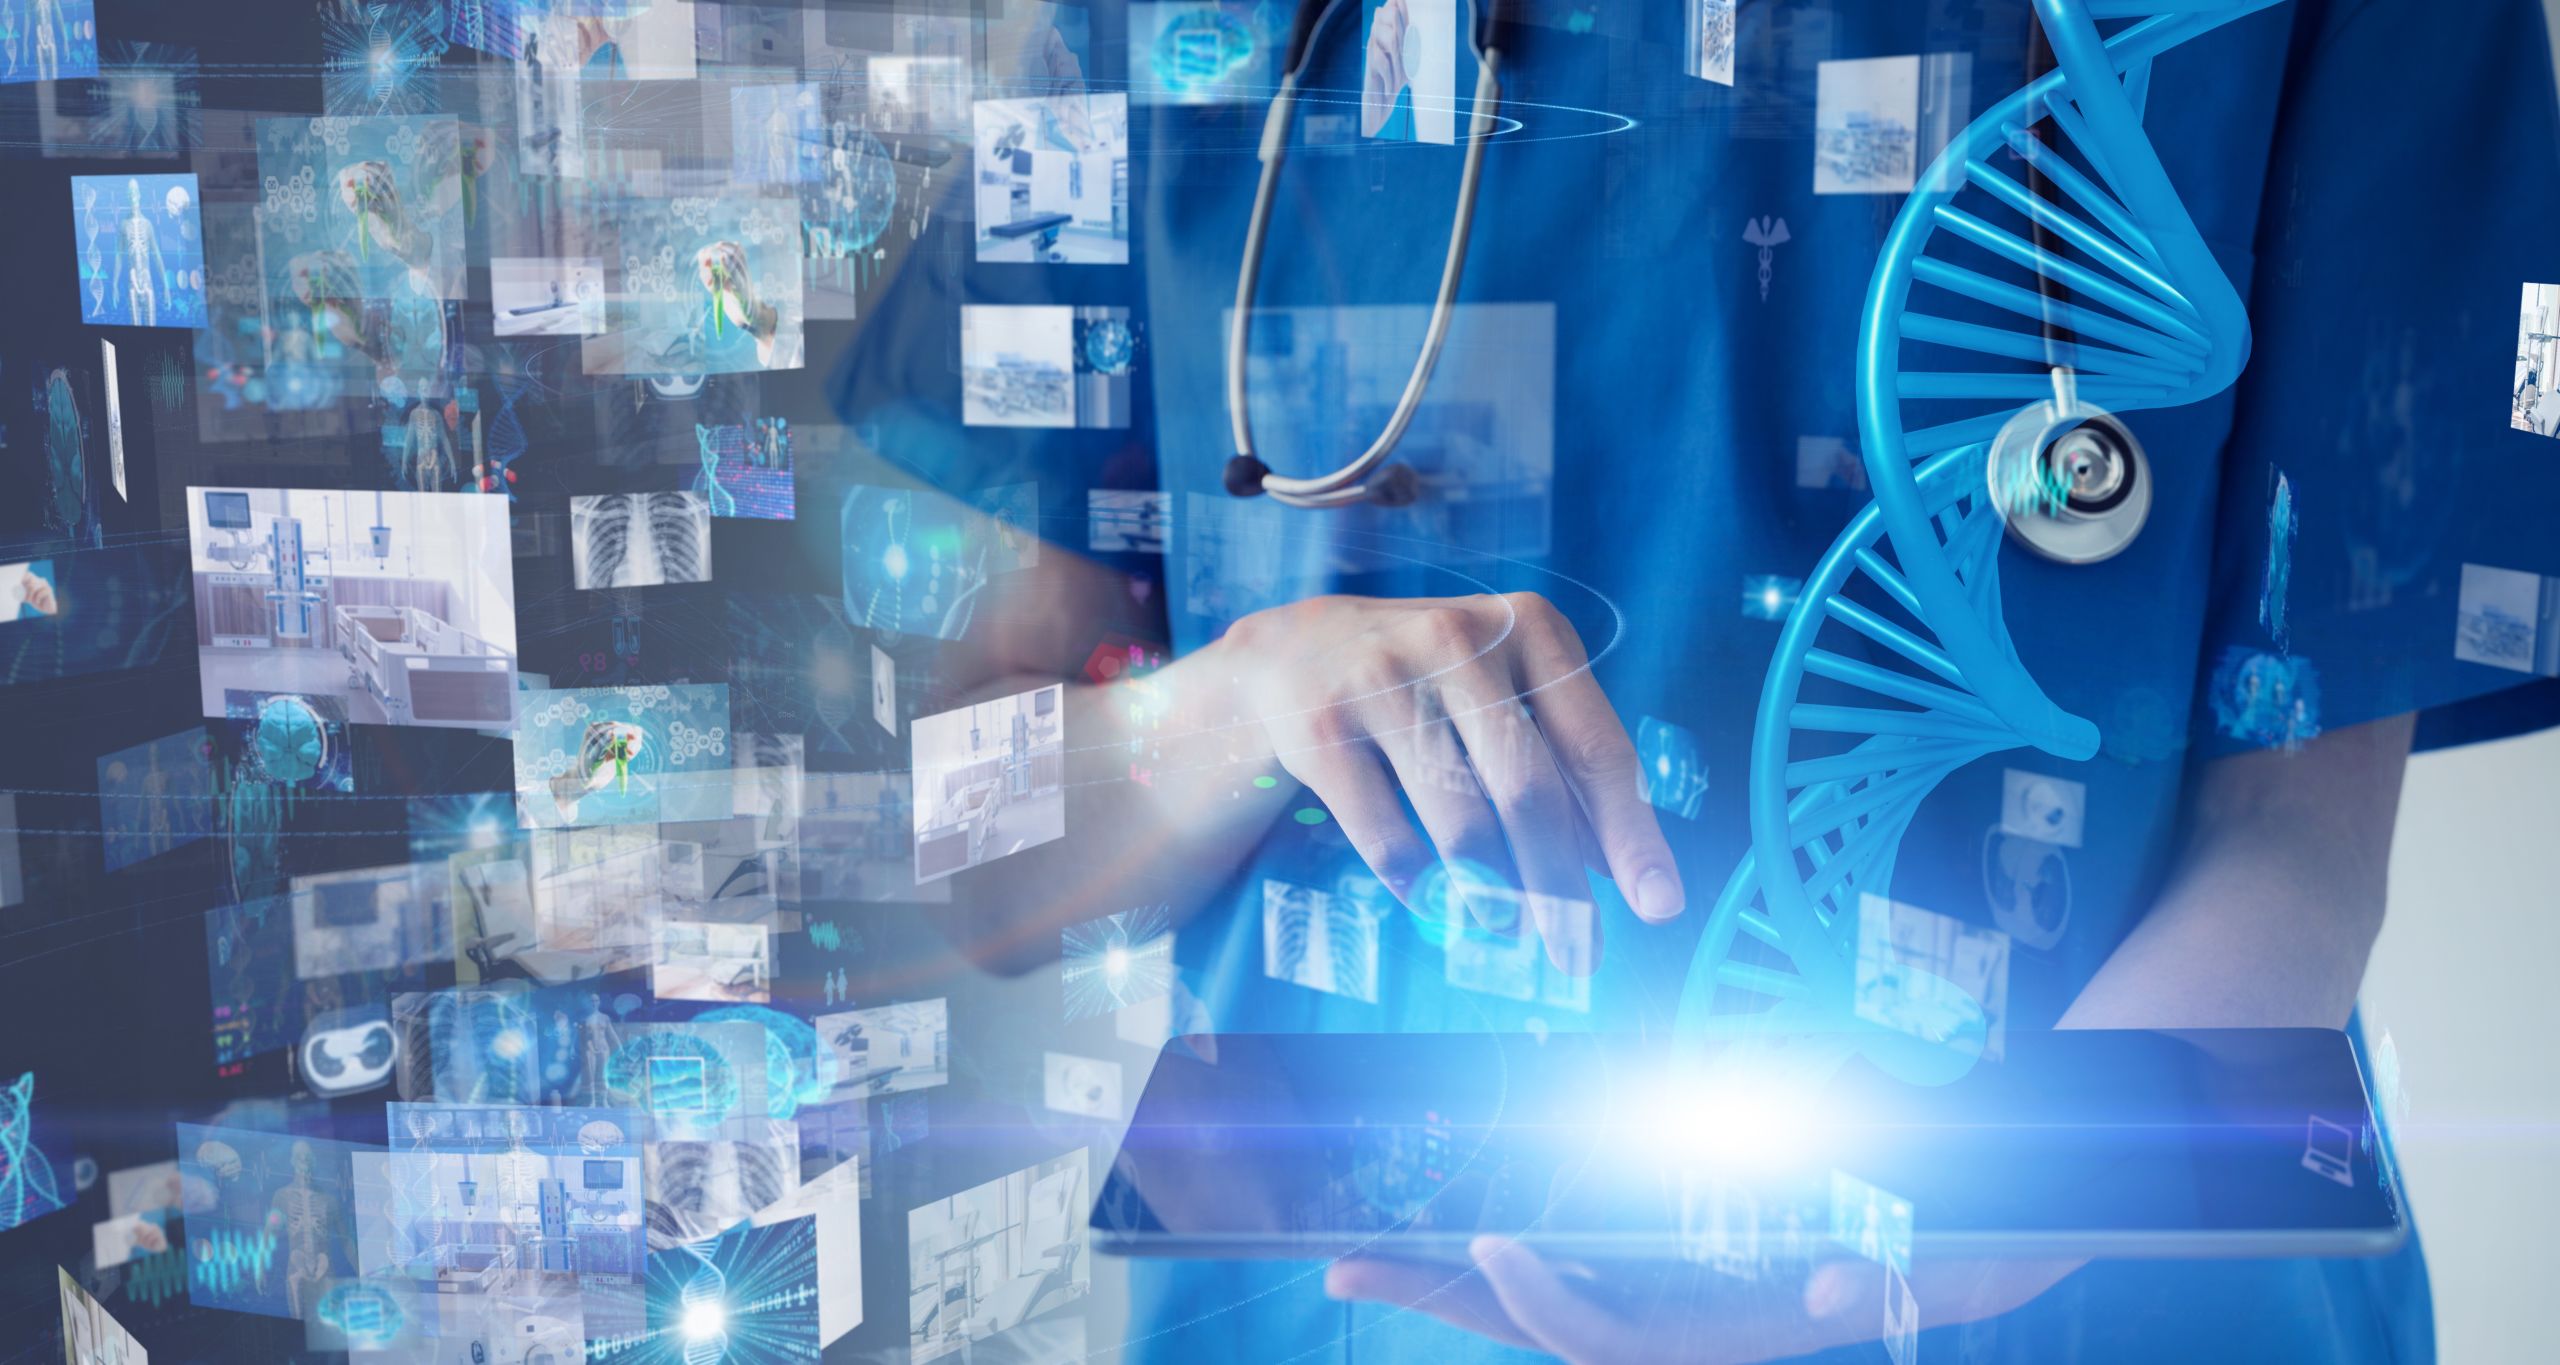 An in illustration of a health professional with a stethoscope, and an overlay of a DNA Double helix, and various images of healthcare settings and technologies